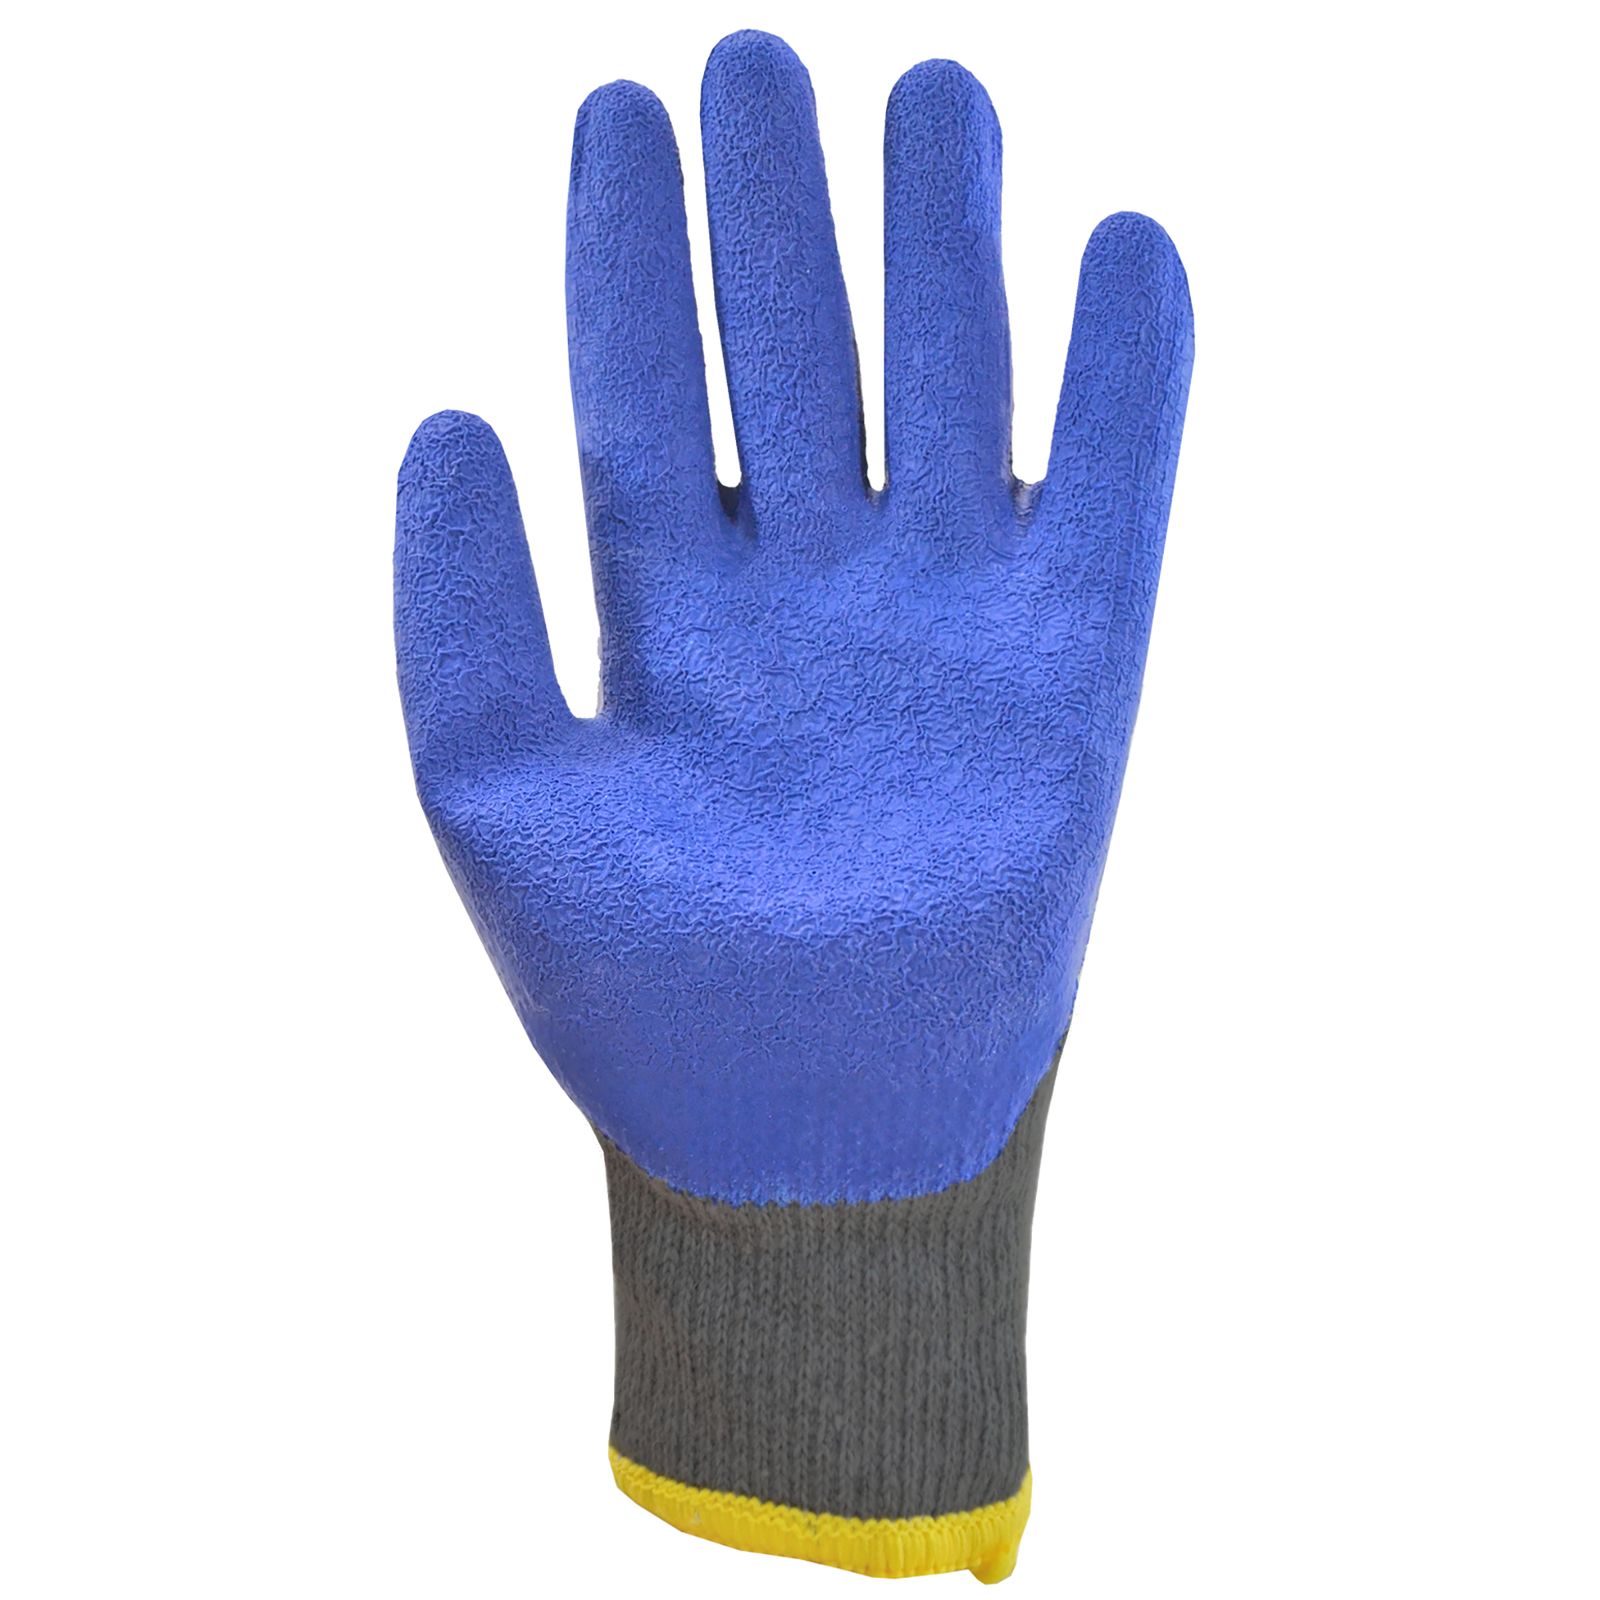 https://technopackcorp.com/cdn/shop/files/SAFETY-WORK-GLOVES-WITH-CRINKLE-LATEX-DIPPED-PALMS-PACK-OF-12-S-GD-07-JORESTECH-H_7_674661fd-f261-43b4-9fda-4bdecb5f9ebd_1600x1600.png?v=1689087308